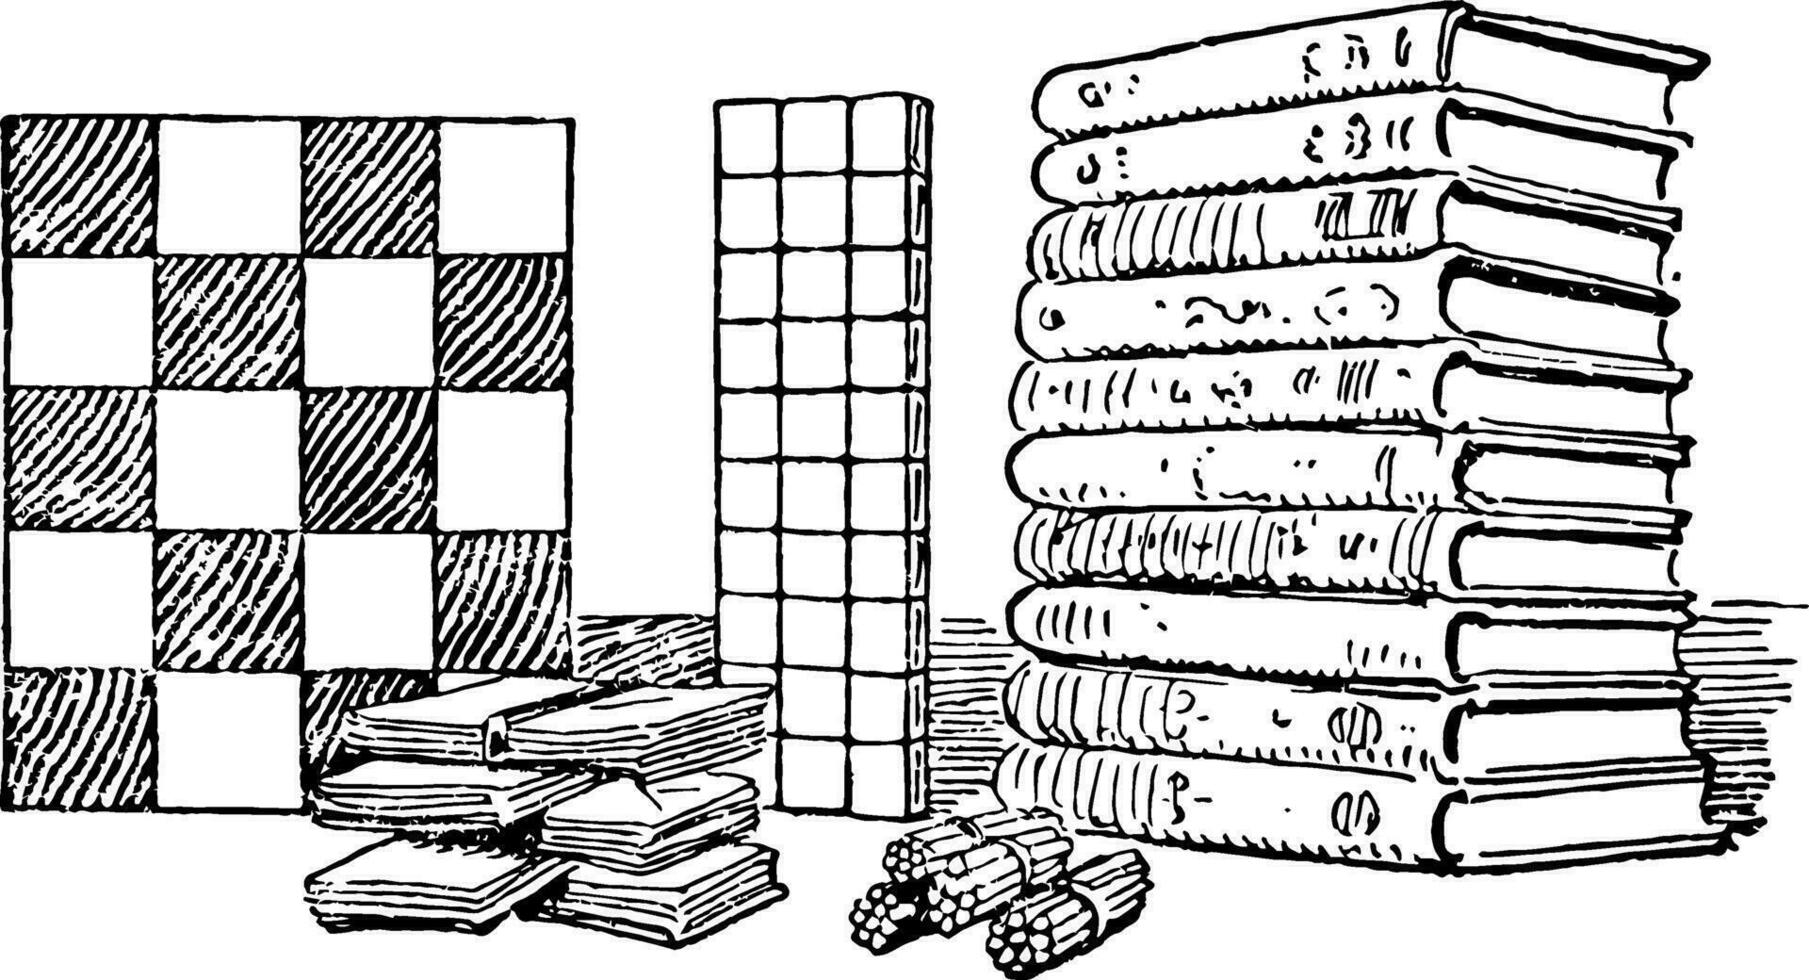 Books or set of sheets, vintage engraving. vector